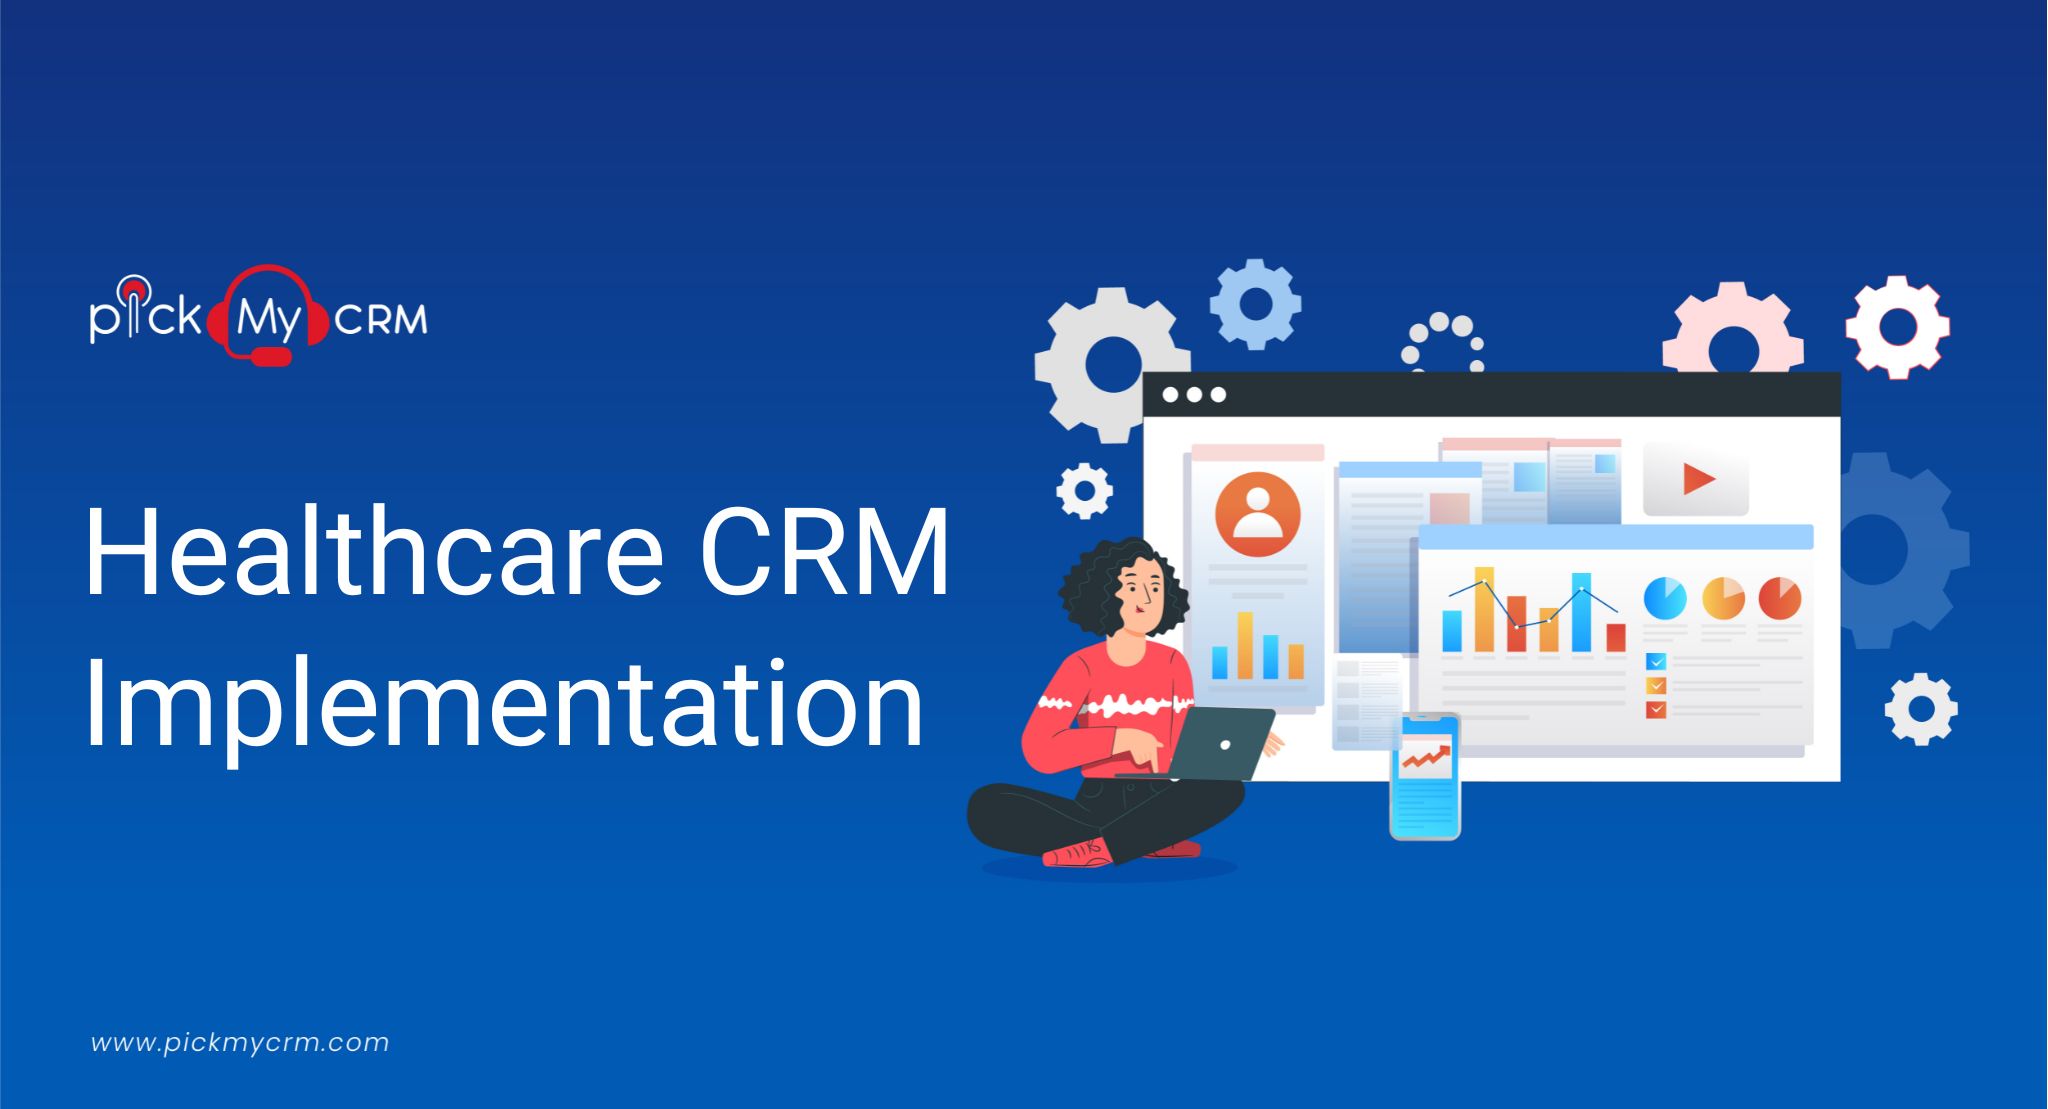 Healthcare CRM Implementation: Enhancing Patient Engagement and Care